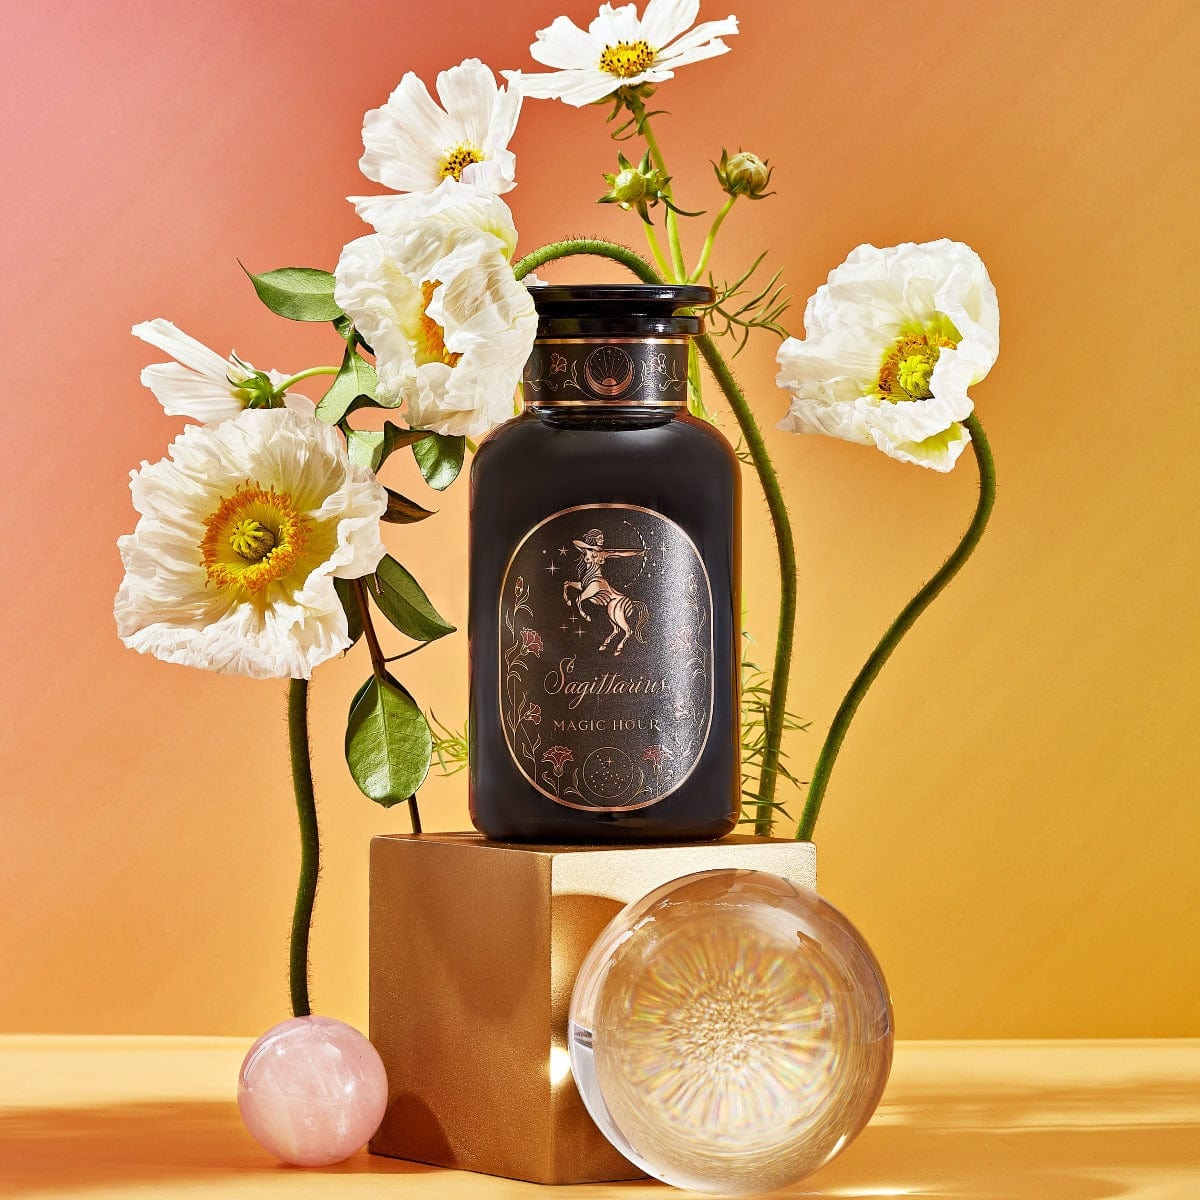 A black perfume bottle with a gold label reading "Sagittarius Tea of Good Fortune & Abundance - Magic Hour" is displayed on a gold pedestal against a gradient background of orange and pink. White flowers and two clear spheres, one pink and one iridescent, surround the bottle, evoking the elegance of Magic Hour tea rituals.